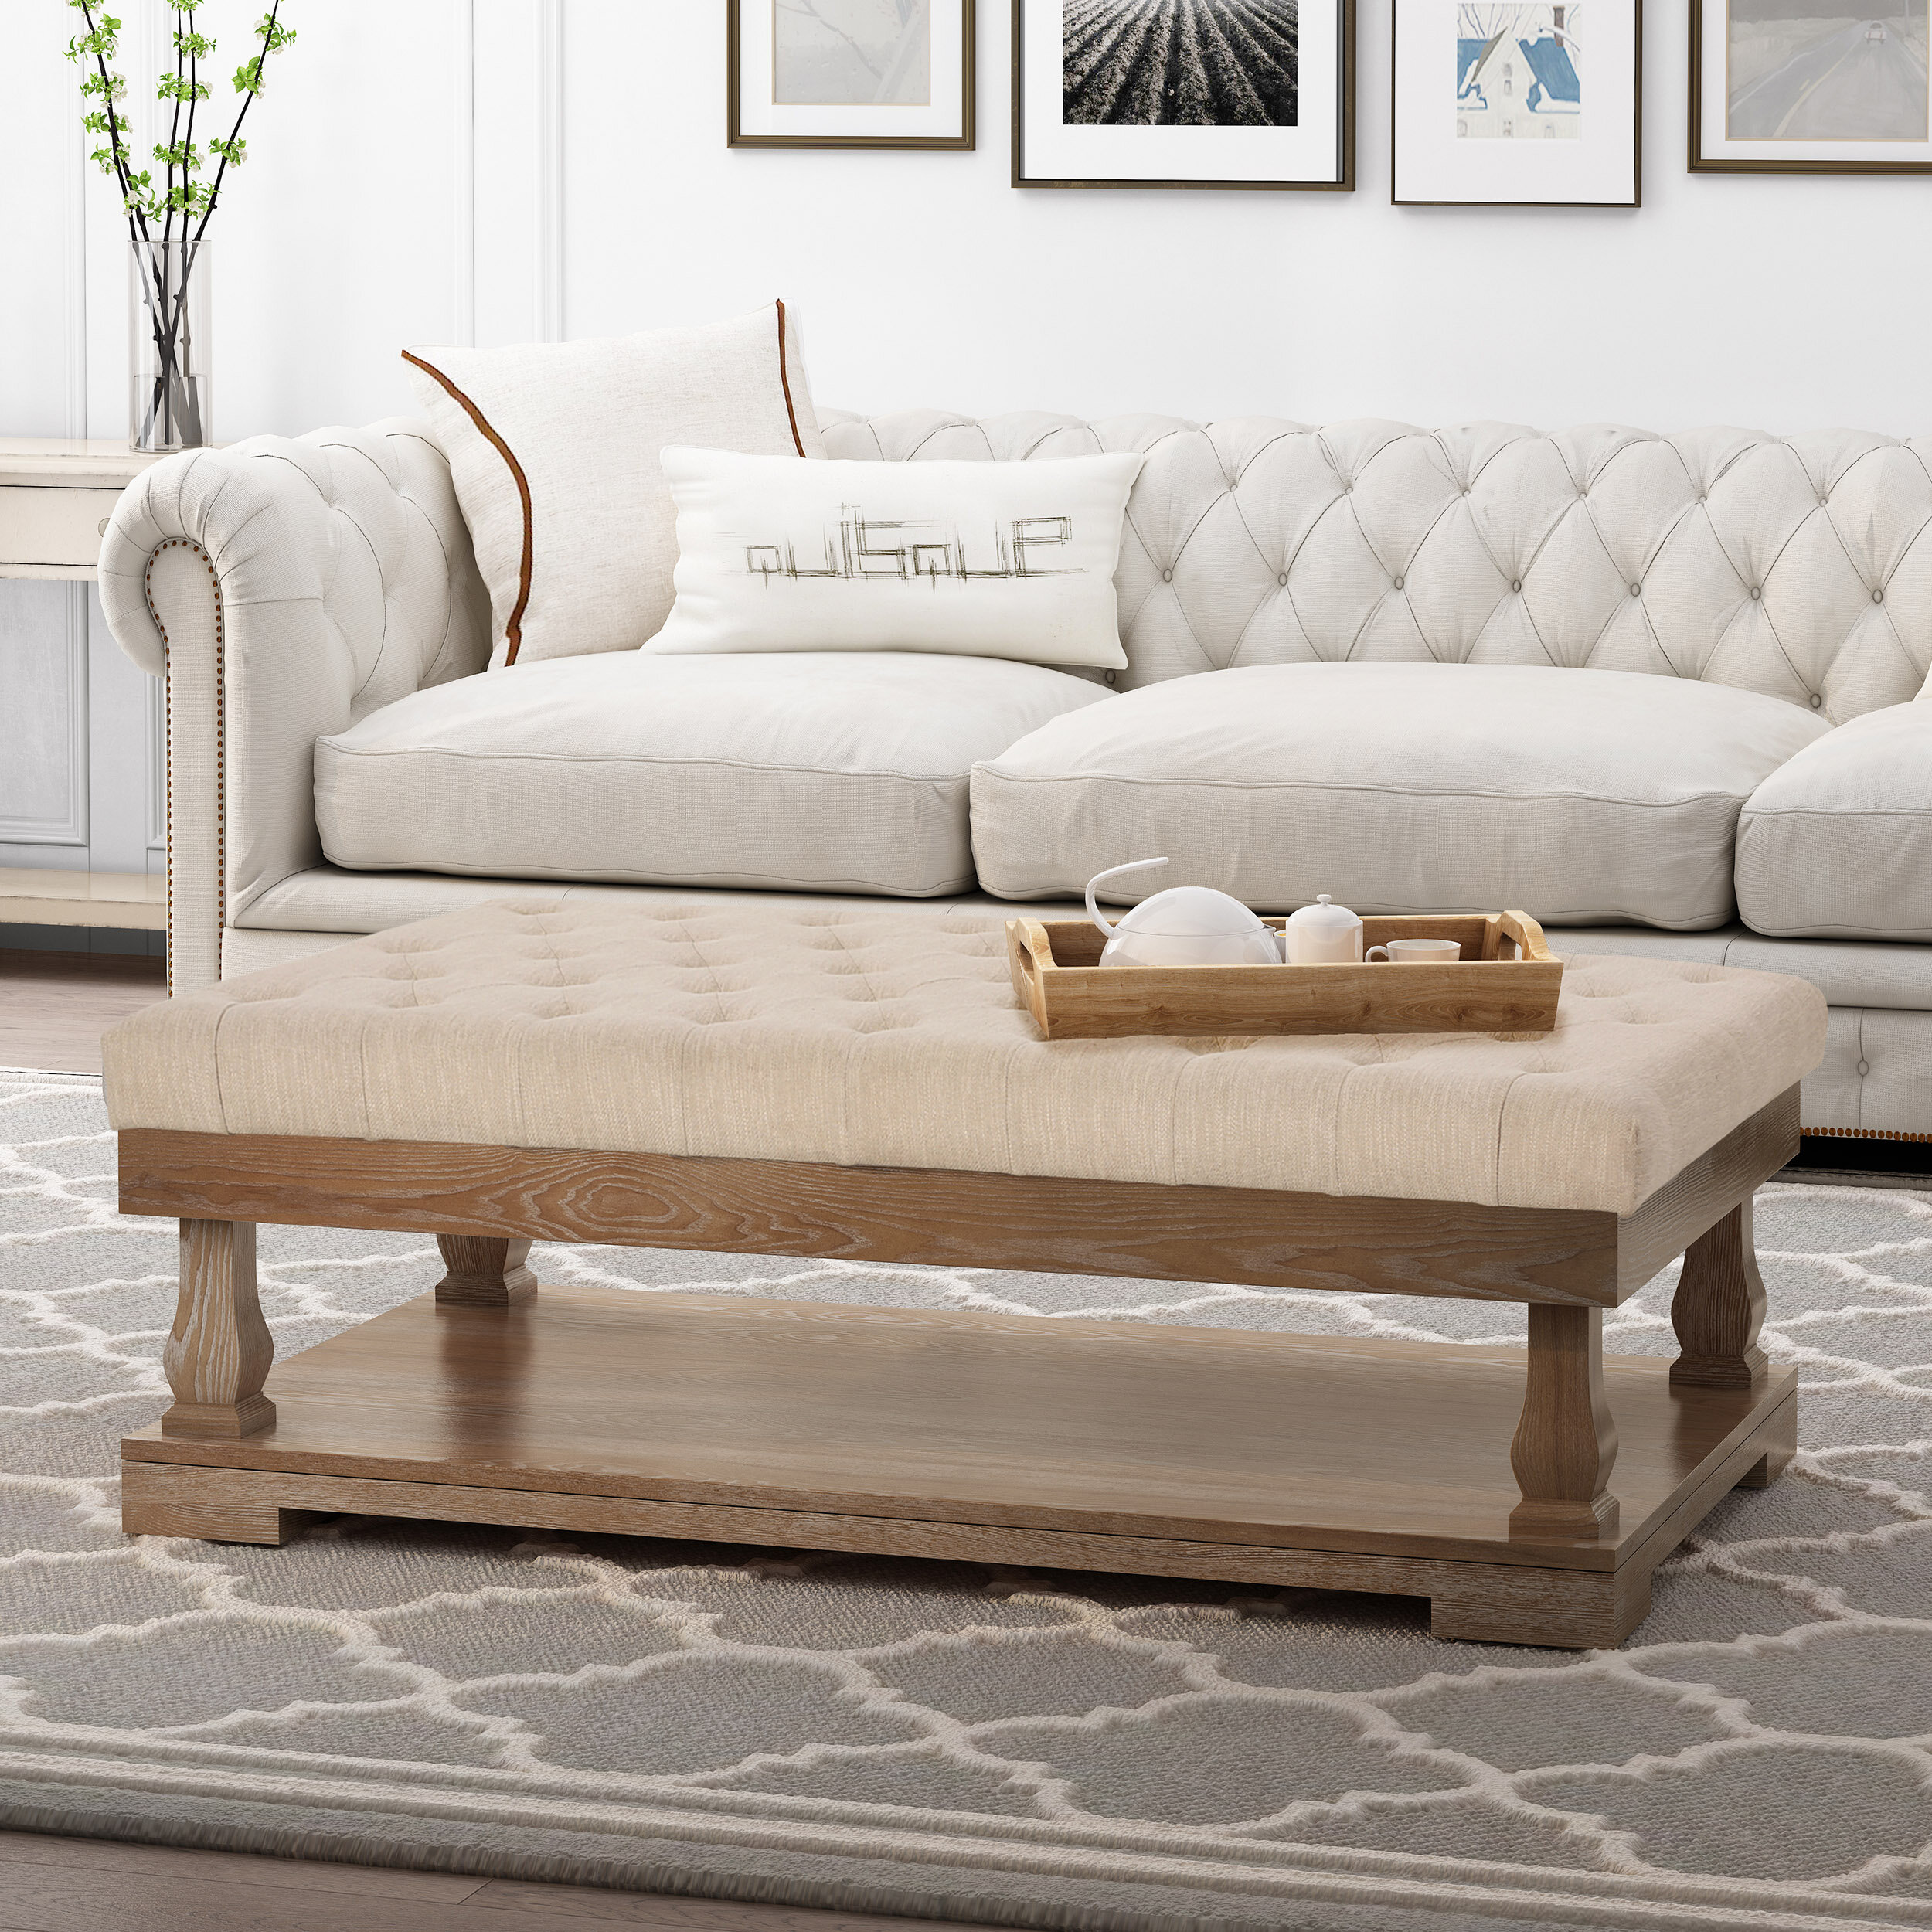 Tufted Coffee Table Rectangle / 77 $73.00 $73.00 ottoman coffee table